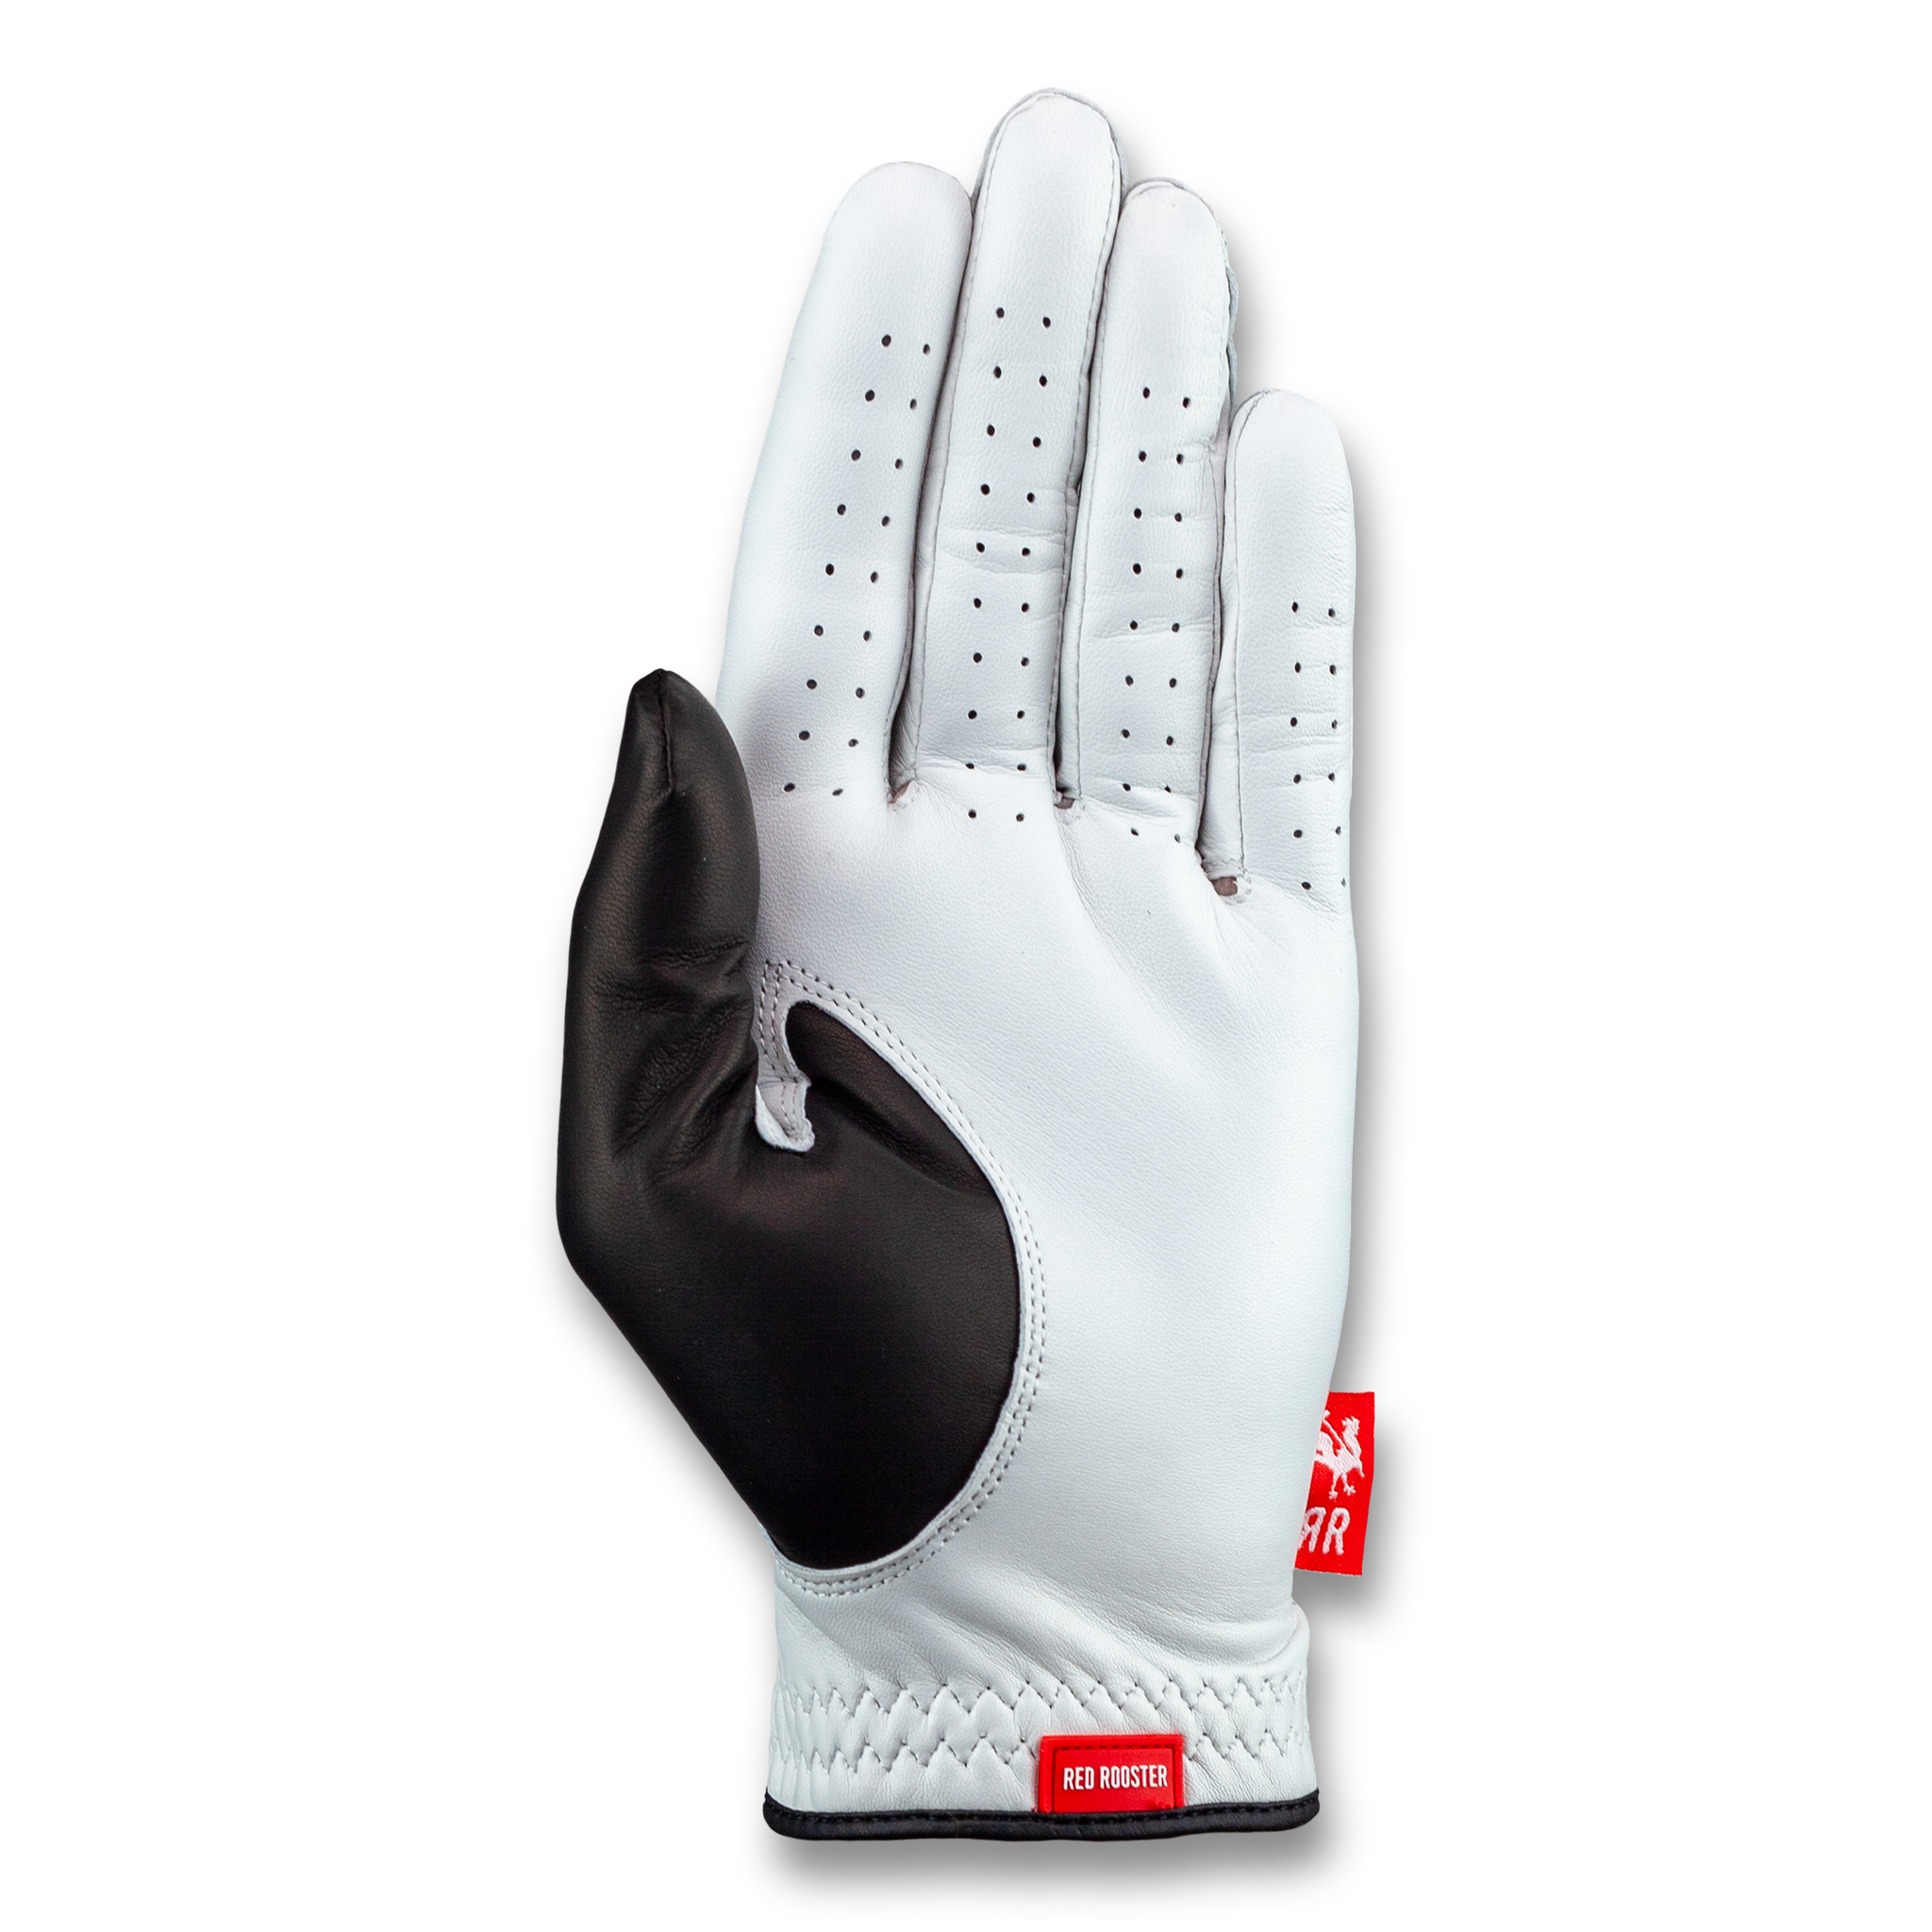 The Wing golf glove inner view